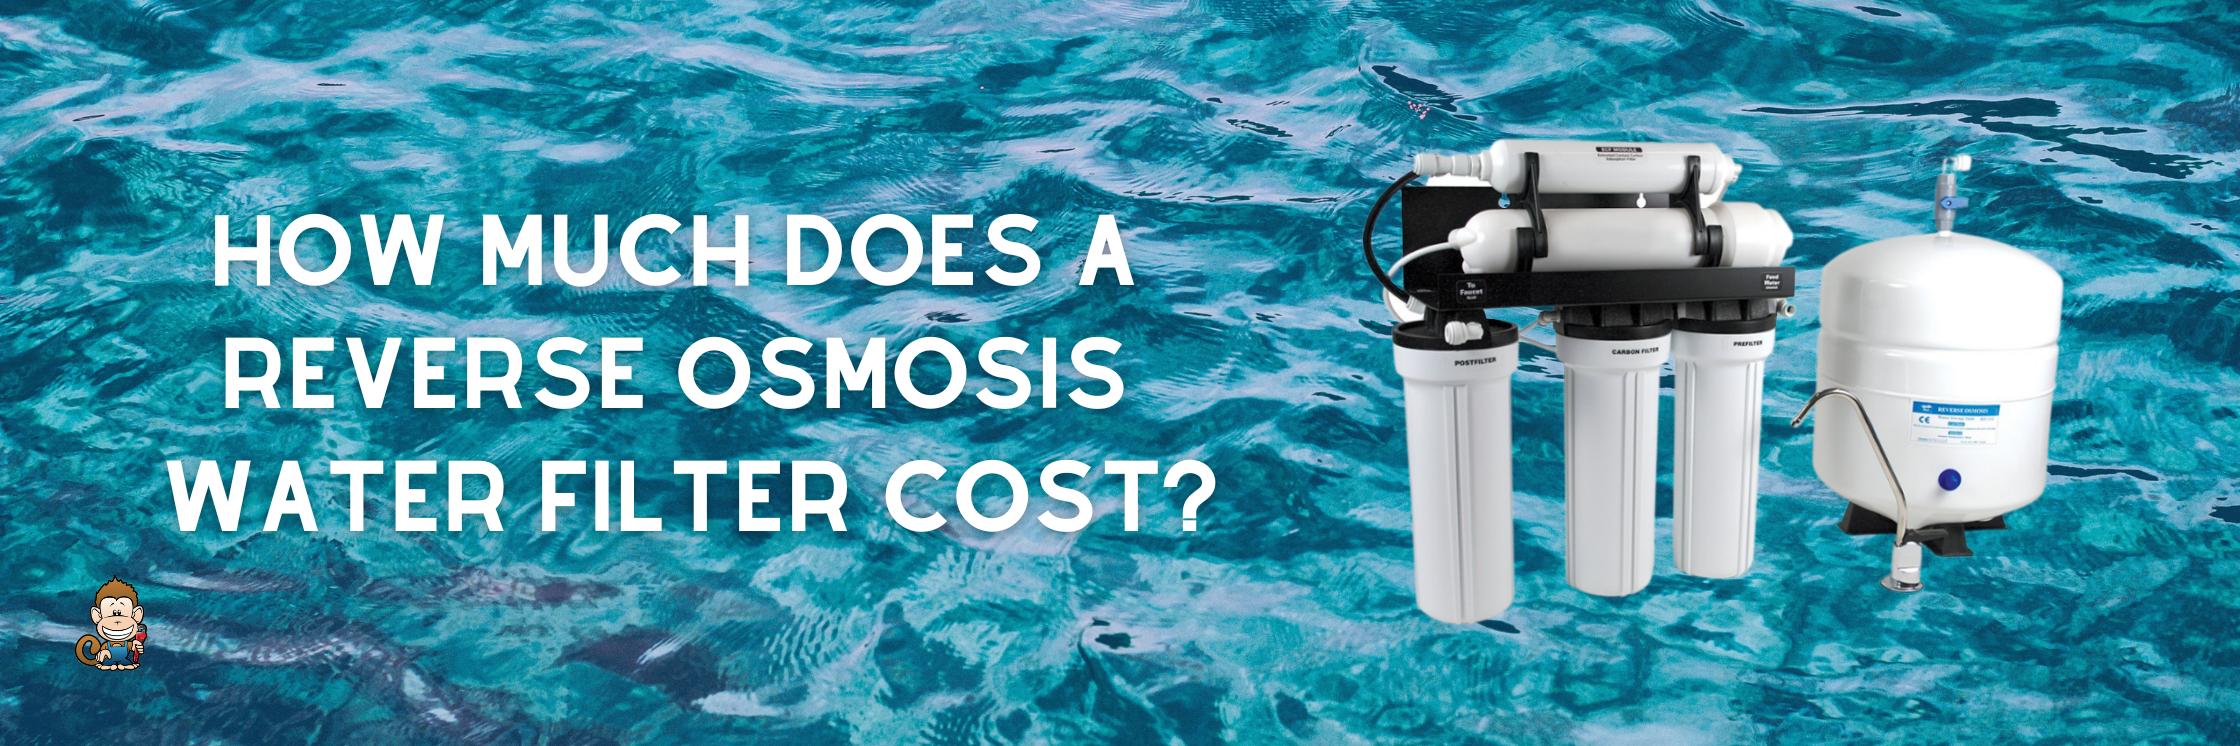 How Much Does a Reverse Osmosis Water Filter Cost?